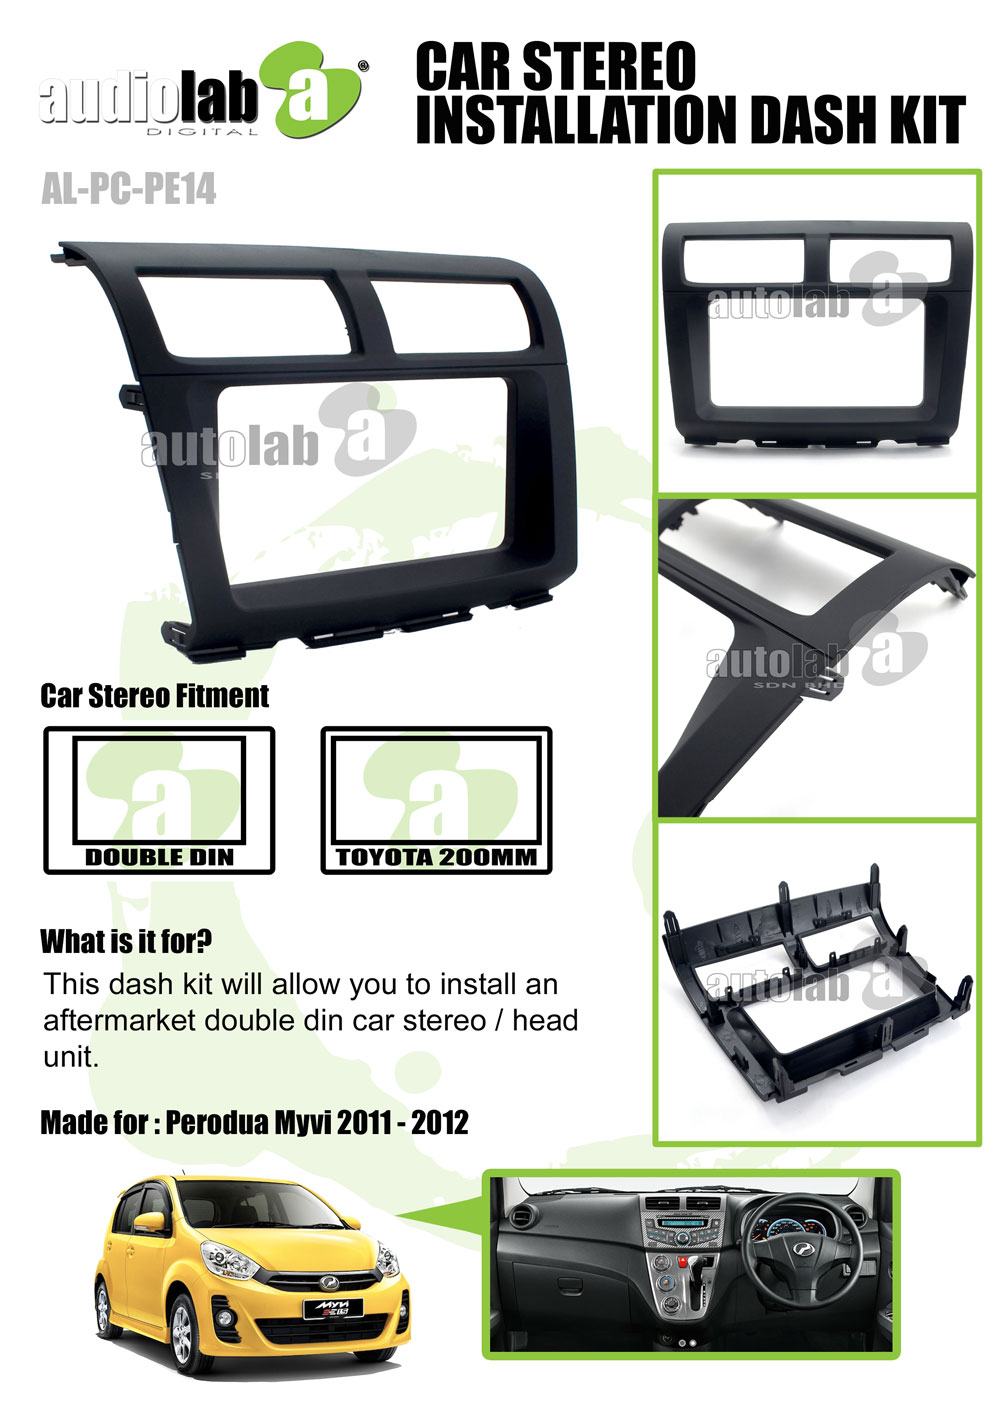 Perodua Myvi 2011 - 2012 Player Casing Dash Kit for Double DIN / Toyota 200mm